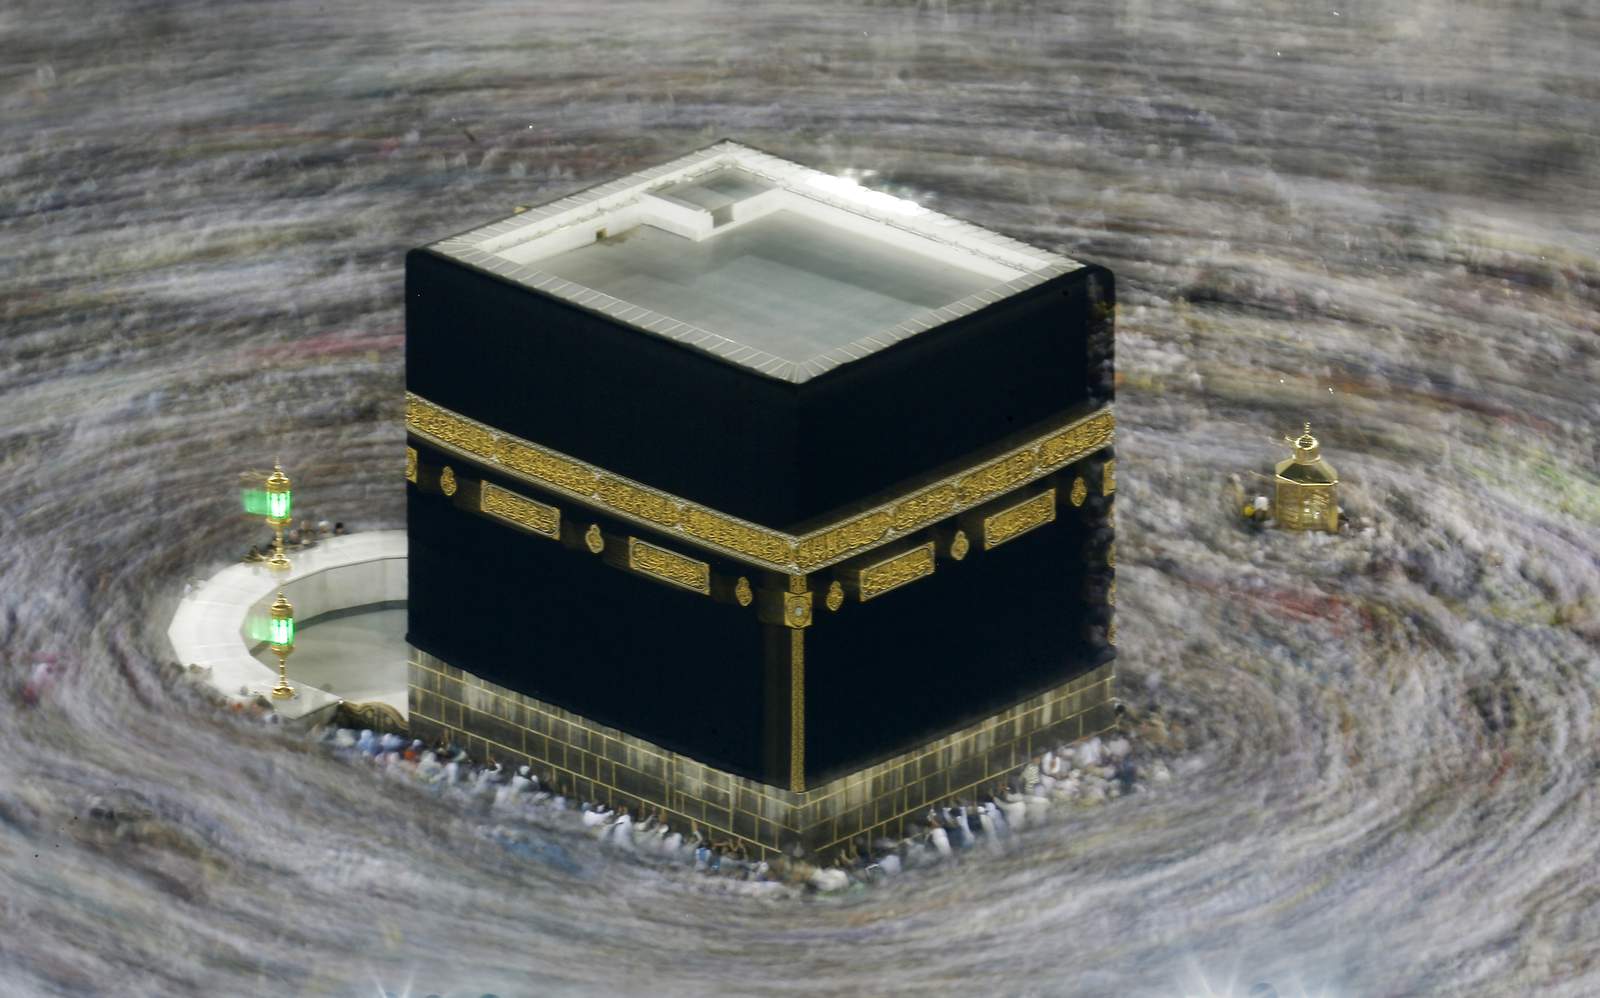 Muslims to wait a year for hajj as virus prompts Saudi curbs